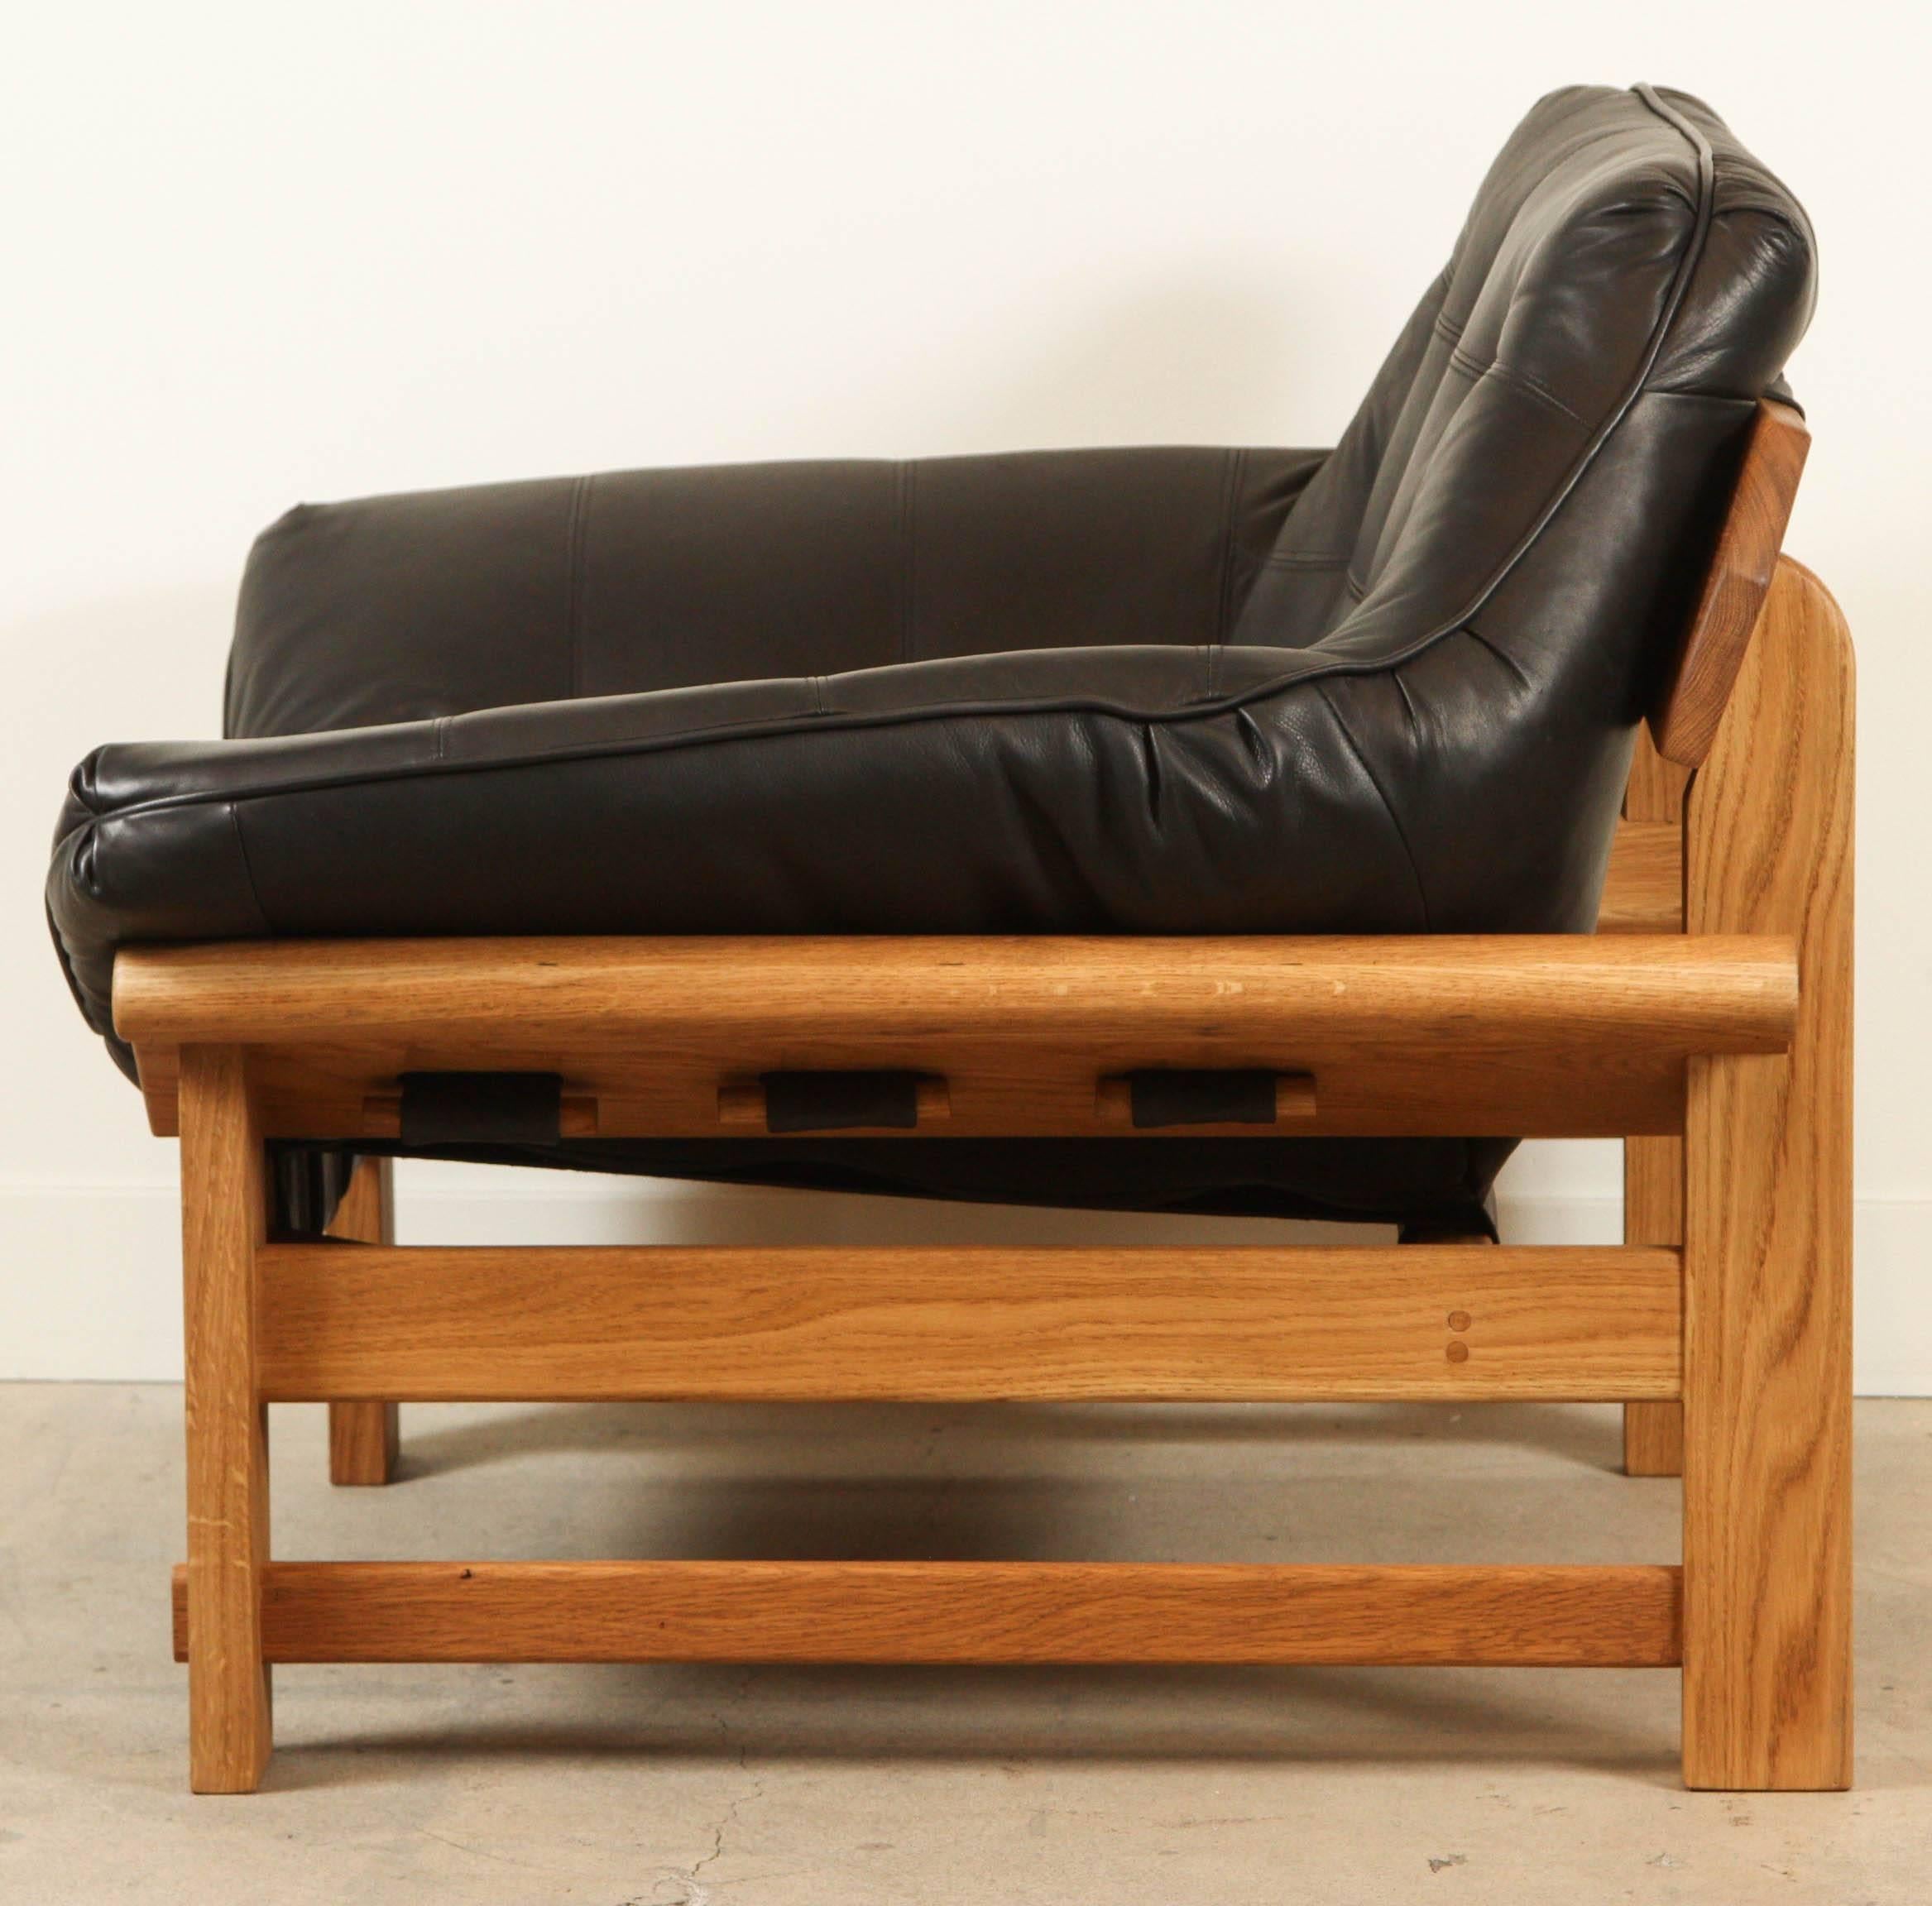 American Pair of Ojai Lounge Chairs by Lawson-Fenning